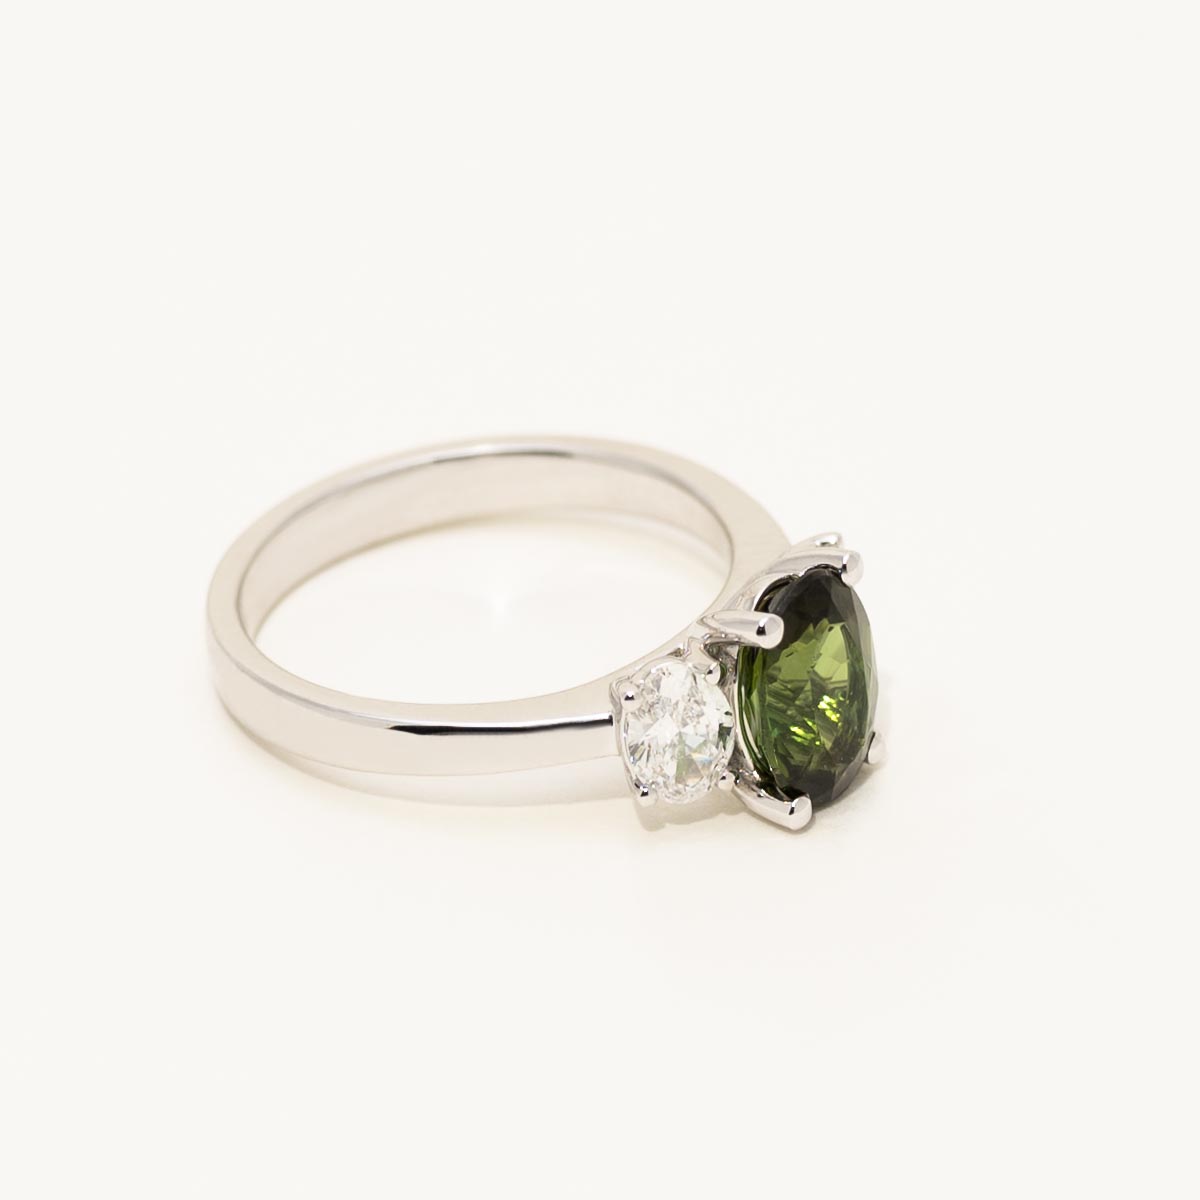 Maine Green Tourmaline Ring in 14kt White Gold with Diamonds (5/8ct tw)